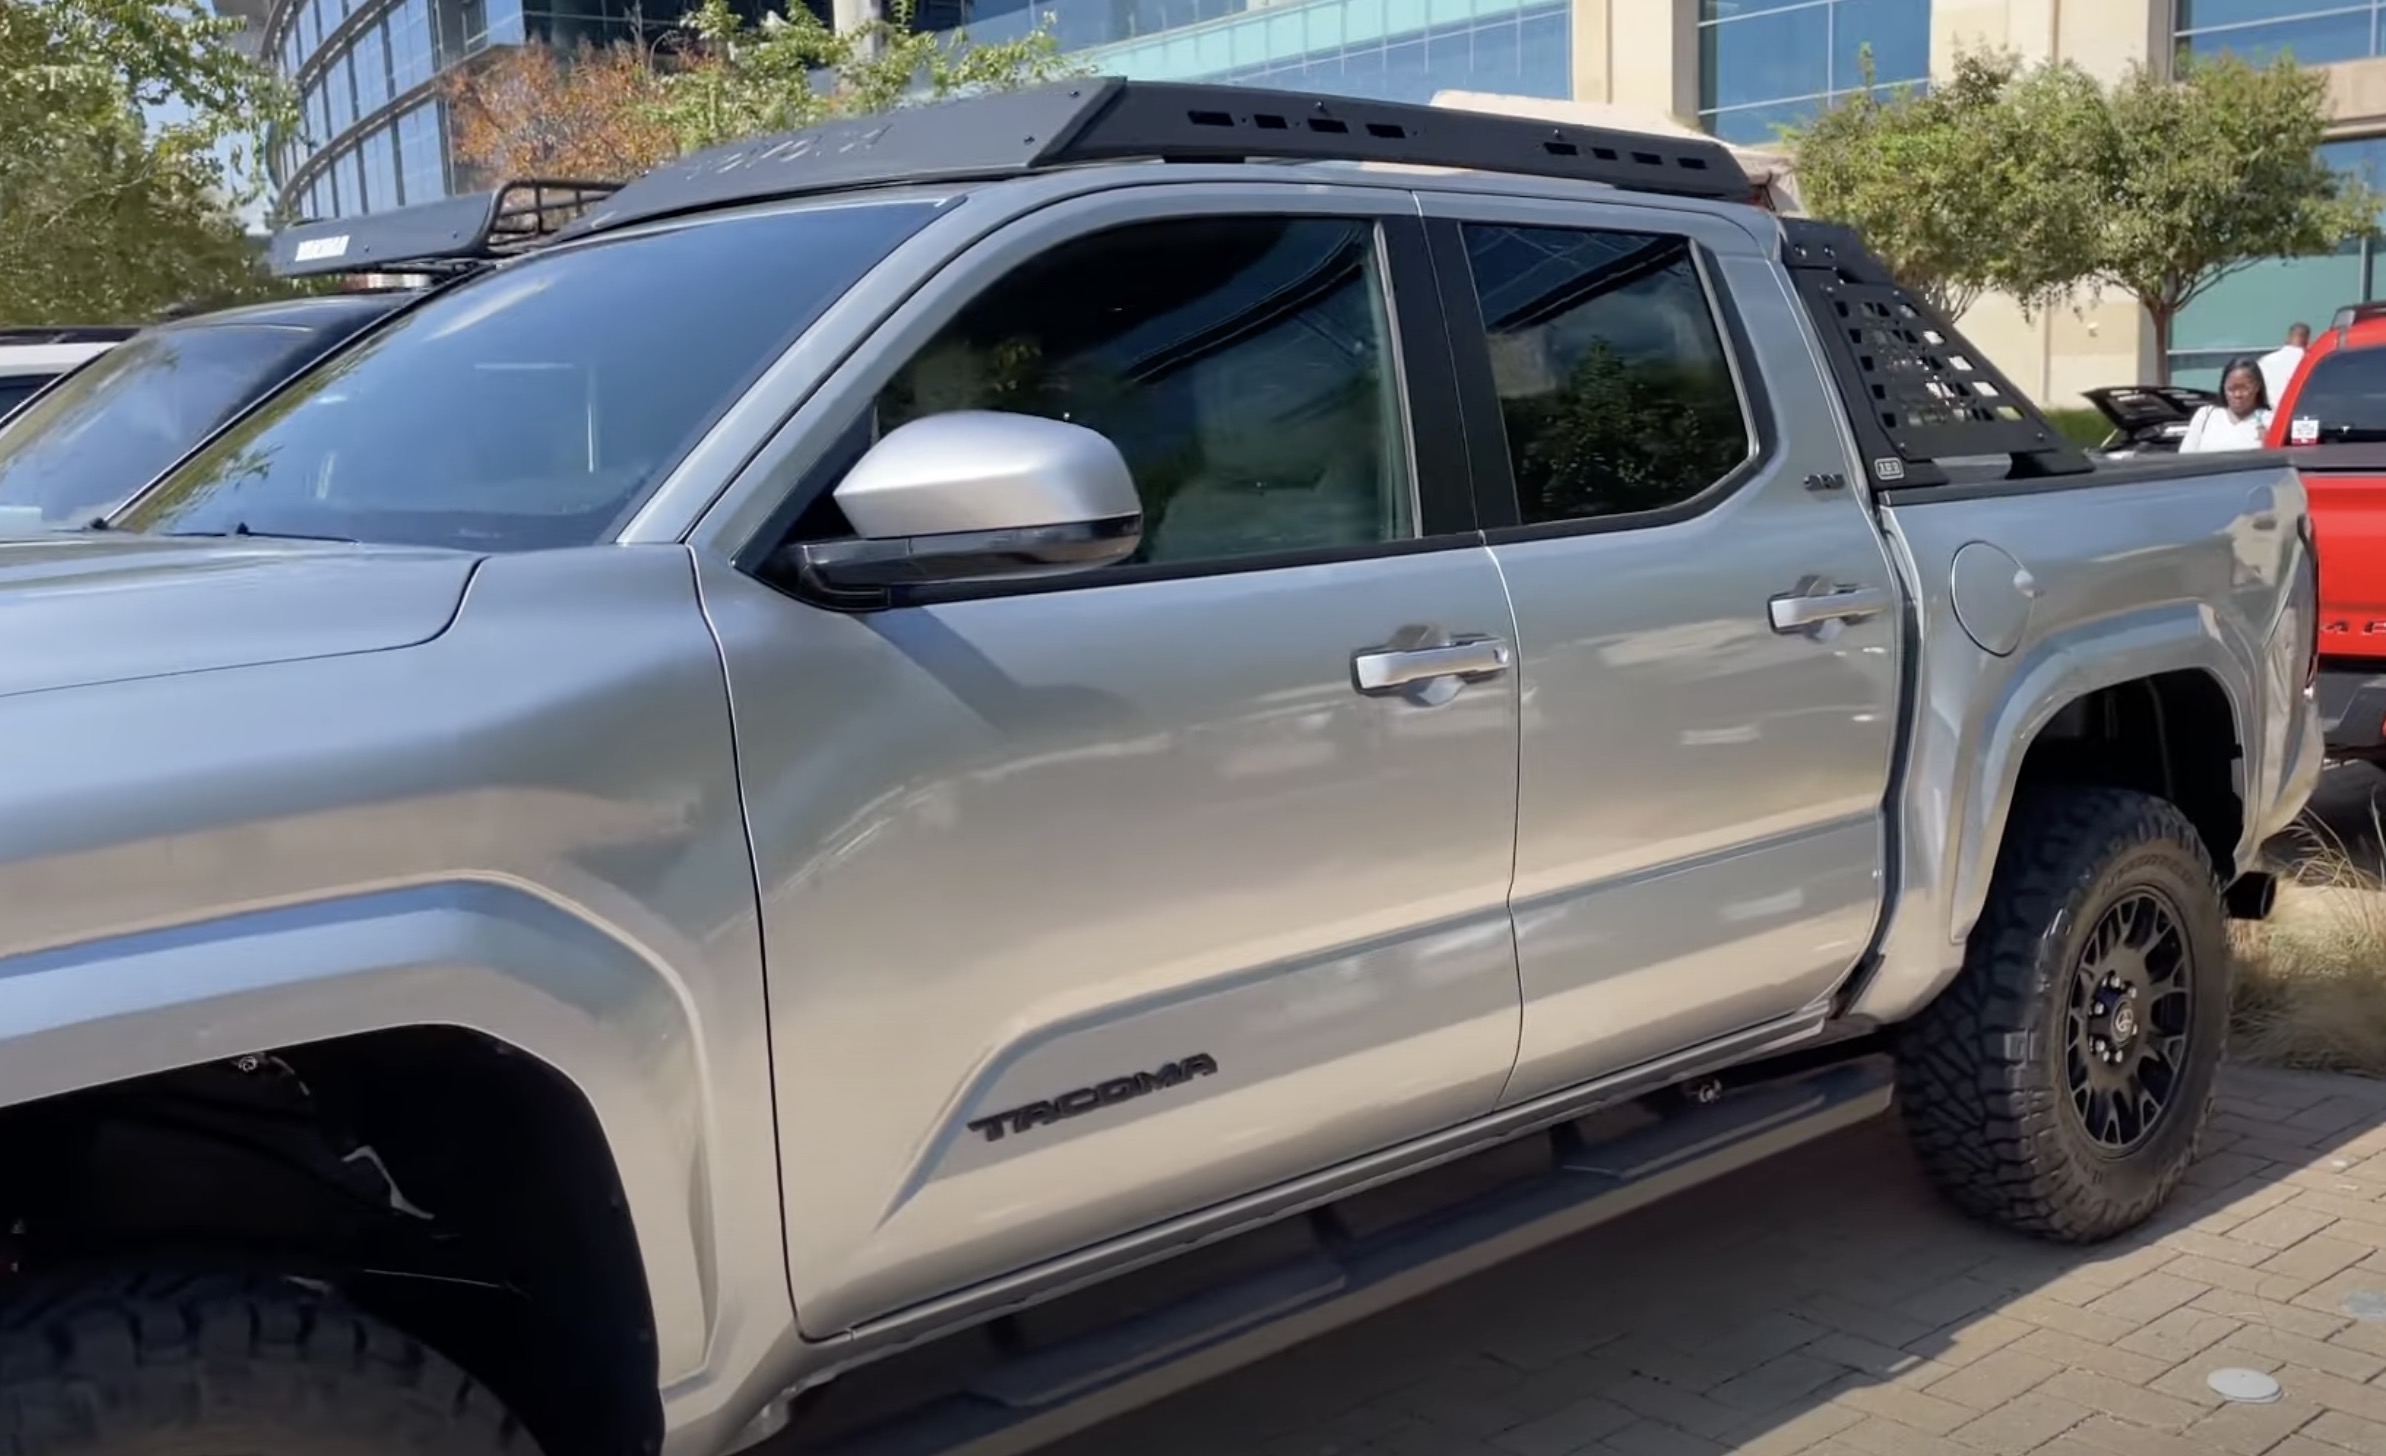 2024 Tacoma Official CELESTIAL SILVER METALLIC 2024 Tacoma Thread (4th Gen) Celestial Silver 2024 Tacom SR5 TRD Lift Kit 2.5 2.0 inches springs struts build 4